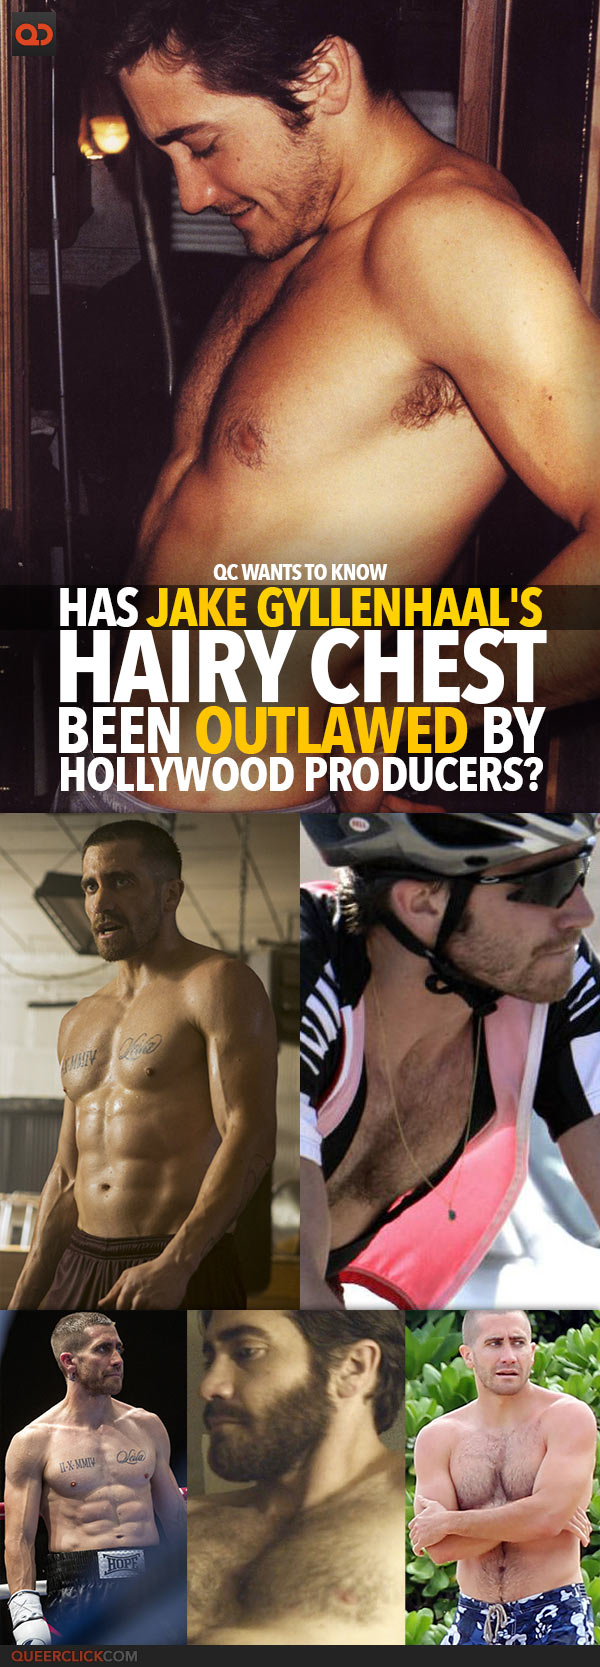 Has Jake Gyllenhaal's Hairy Chest Been Outlawed By Hollywood Producers?